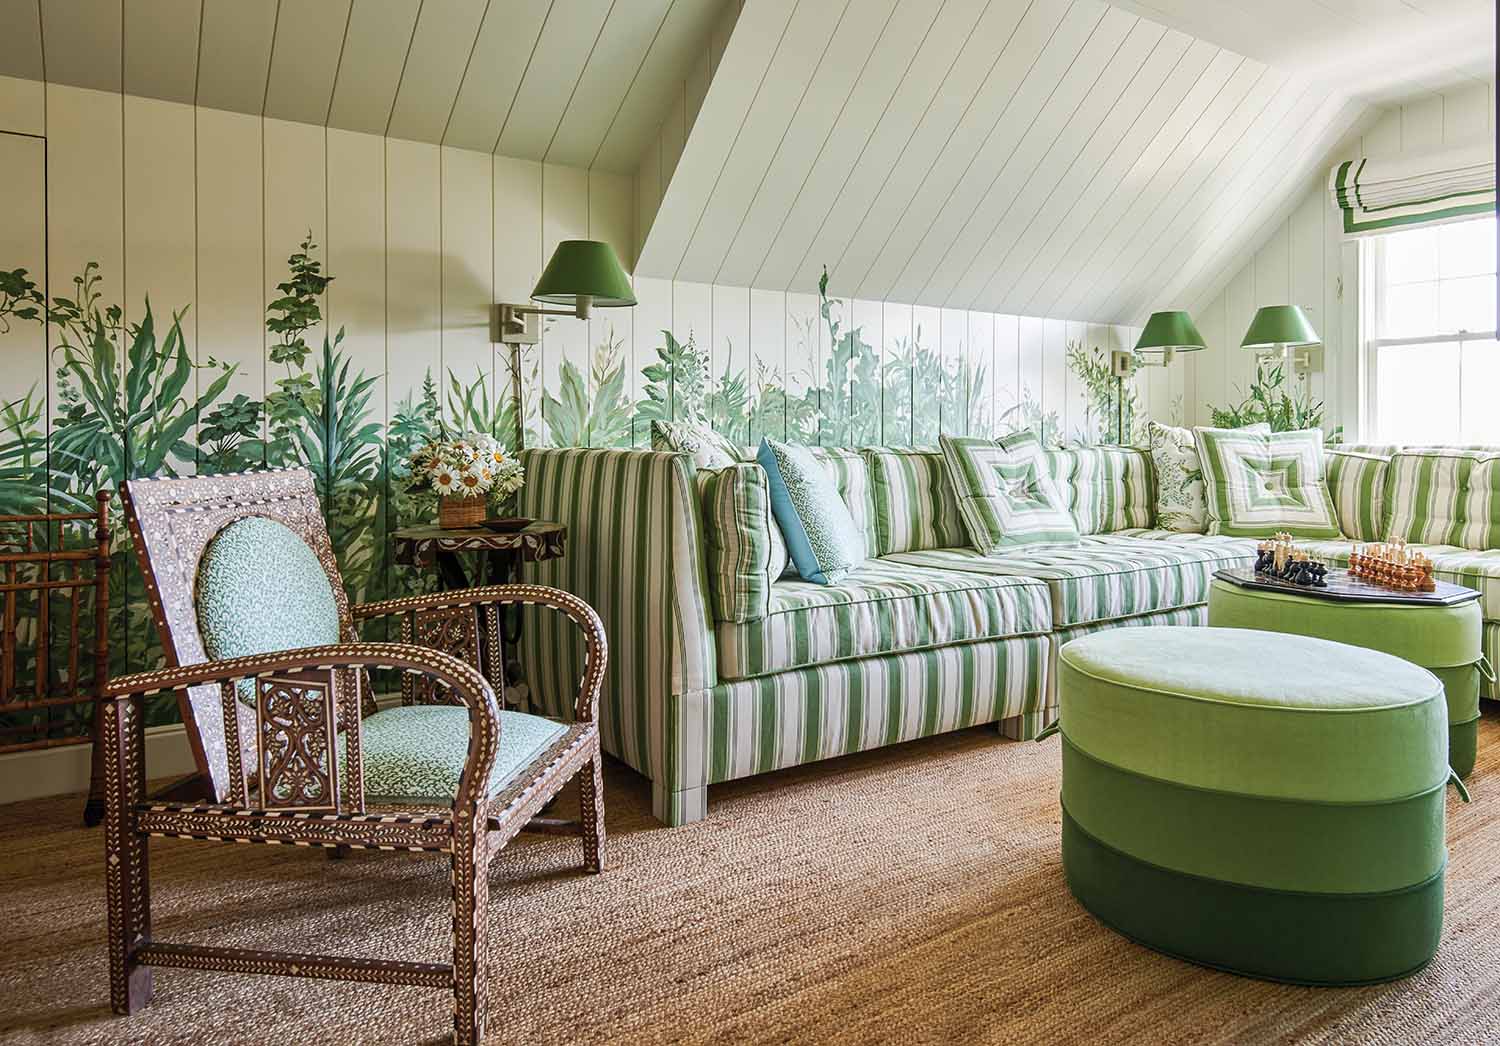 Liz Lange decorated her top floor sitting room in green with a striped couch, ottoman, and a leafy wallpaper.